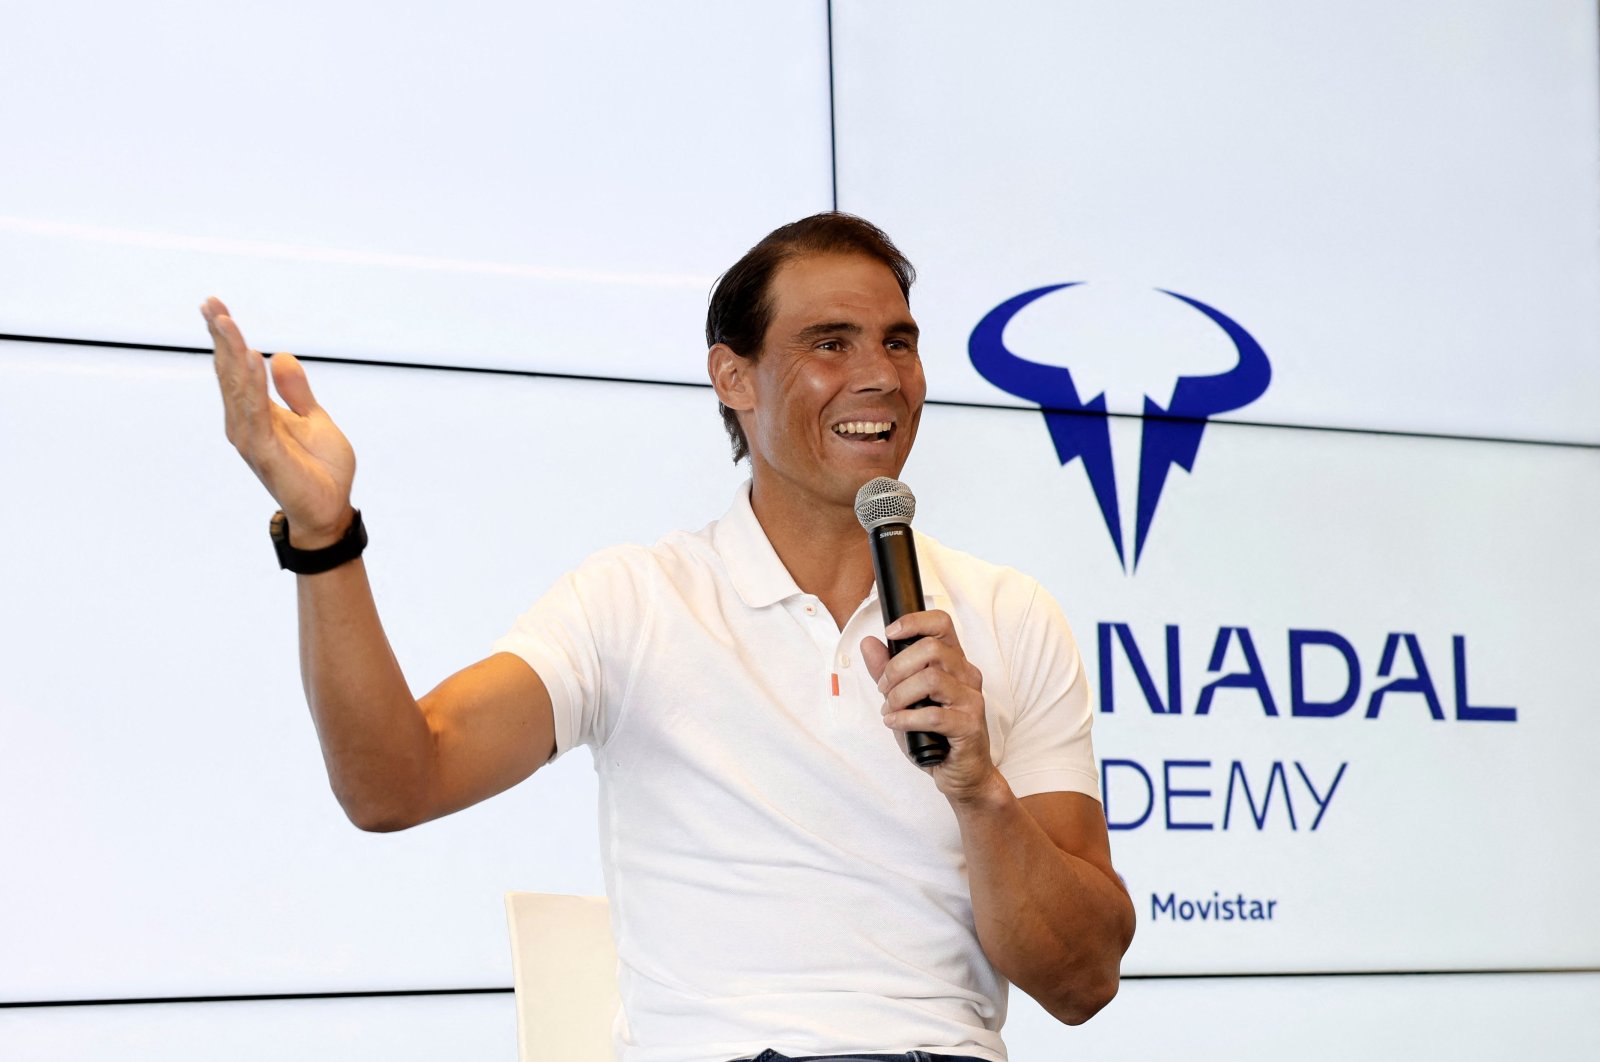 Spanish tennis player Rafael Nadal gestures as he talks during a press conference to announce he will not compete in the French Open, at the Rafa Nadal Academy, Manacor, Spain, May 18, 2023. (AFP Photo)